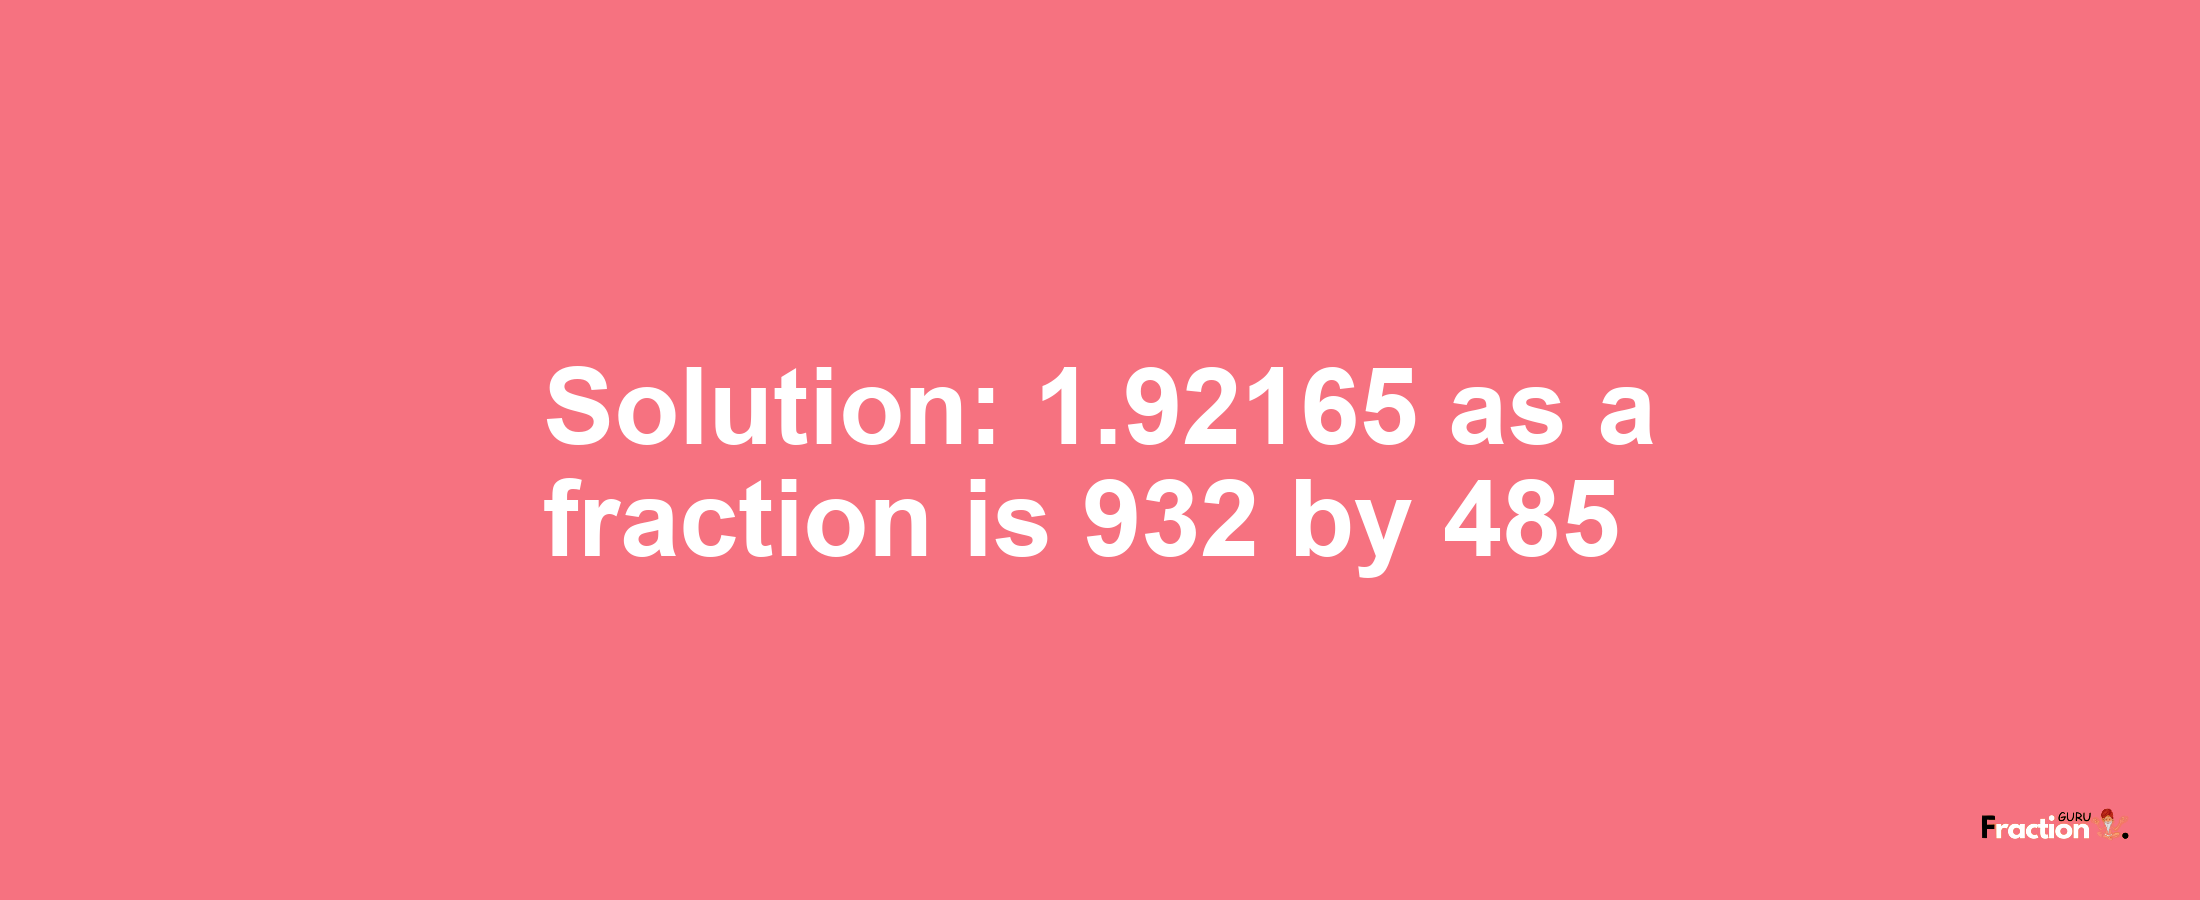 Solution:1.92165 as a fraction is 932/485